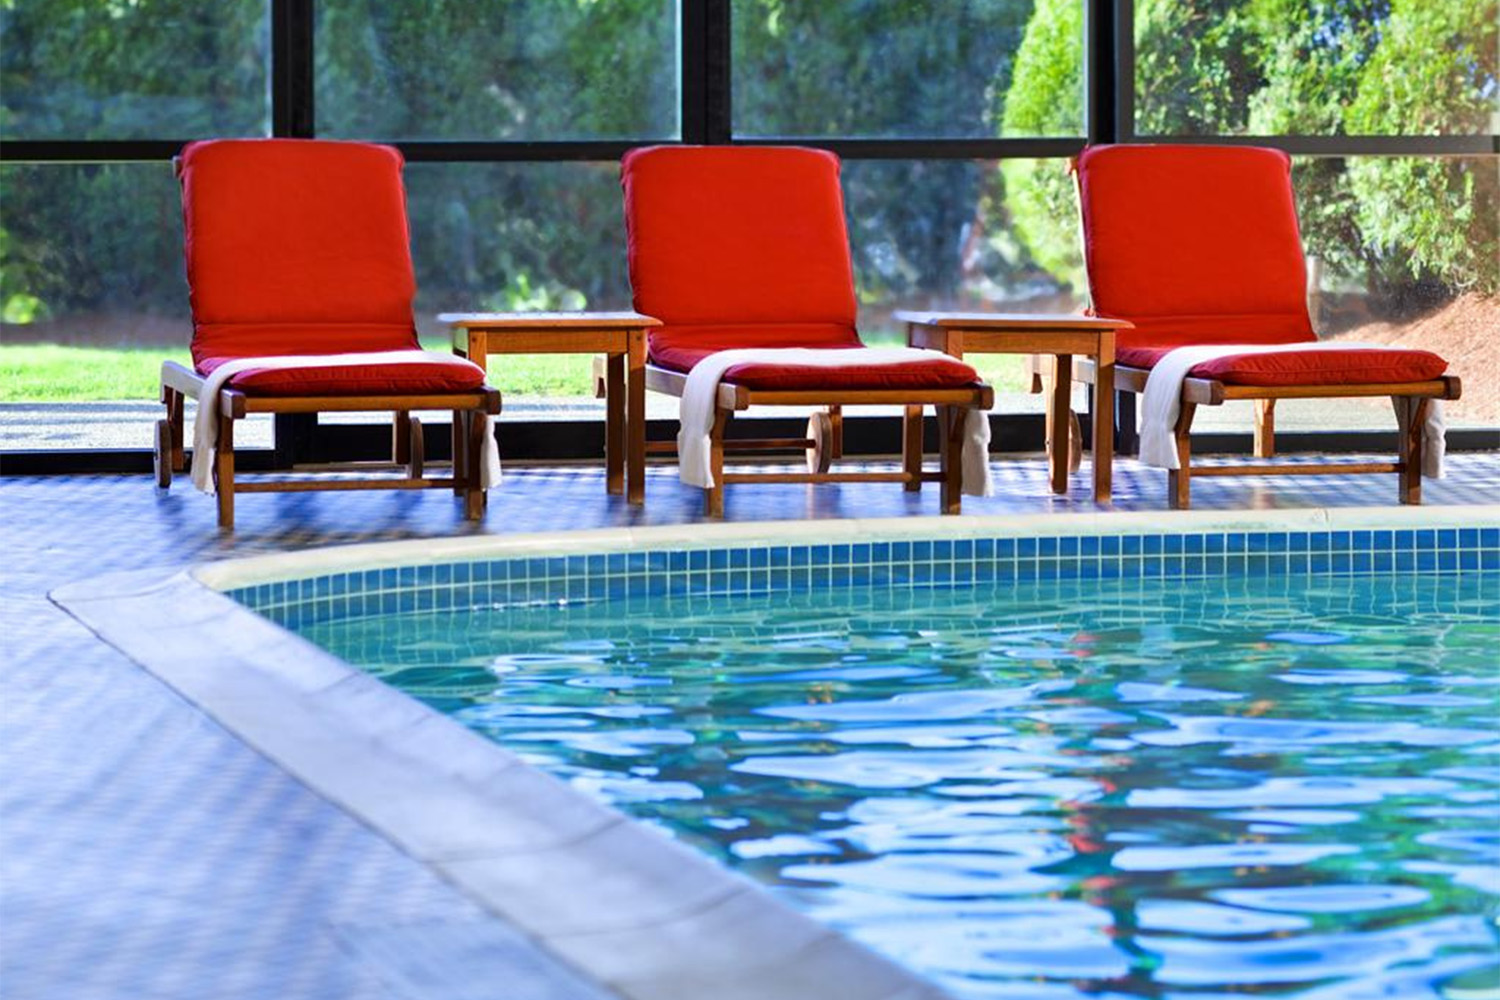 indoor swimming pool complete with red chairs and walls made of windows 